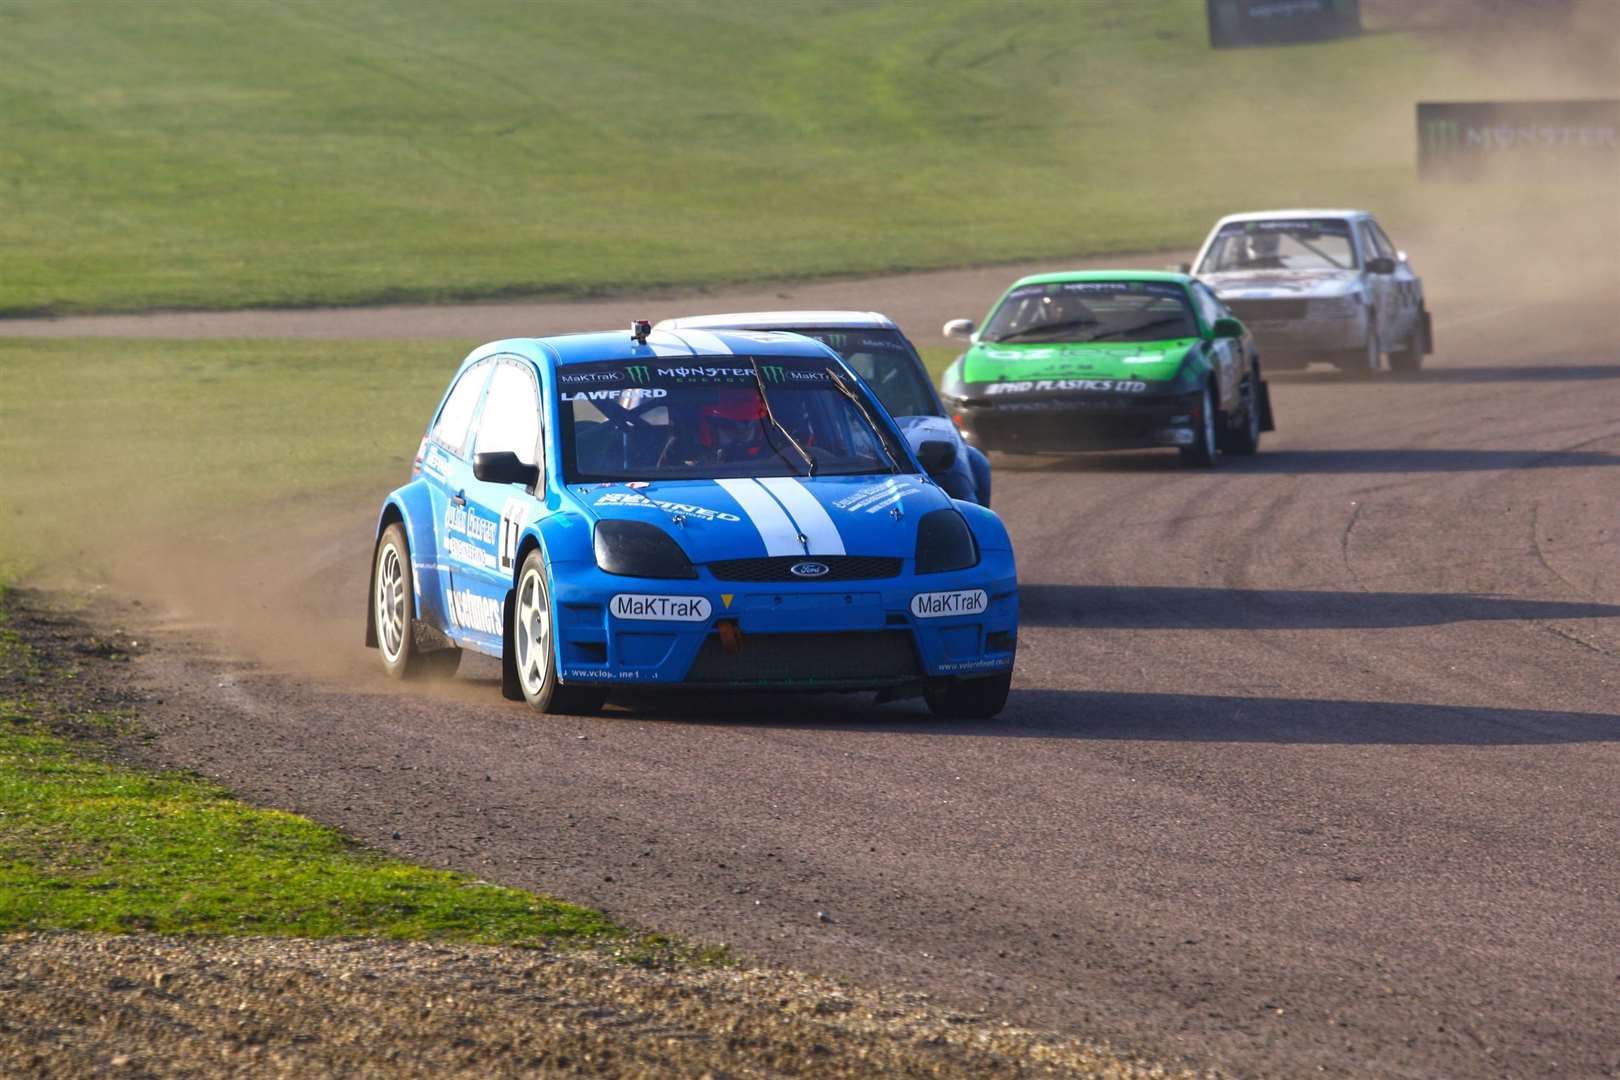 Lawford in action at Lydden Hill in a Ford Fiesta